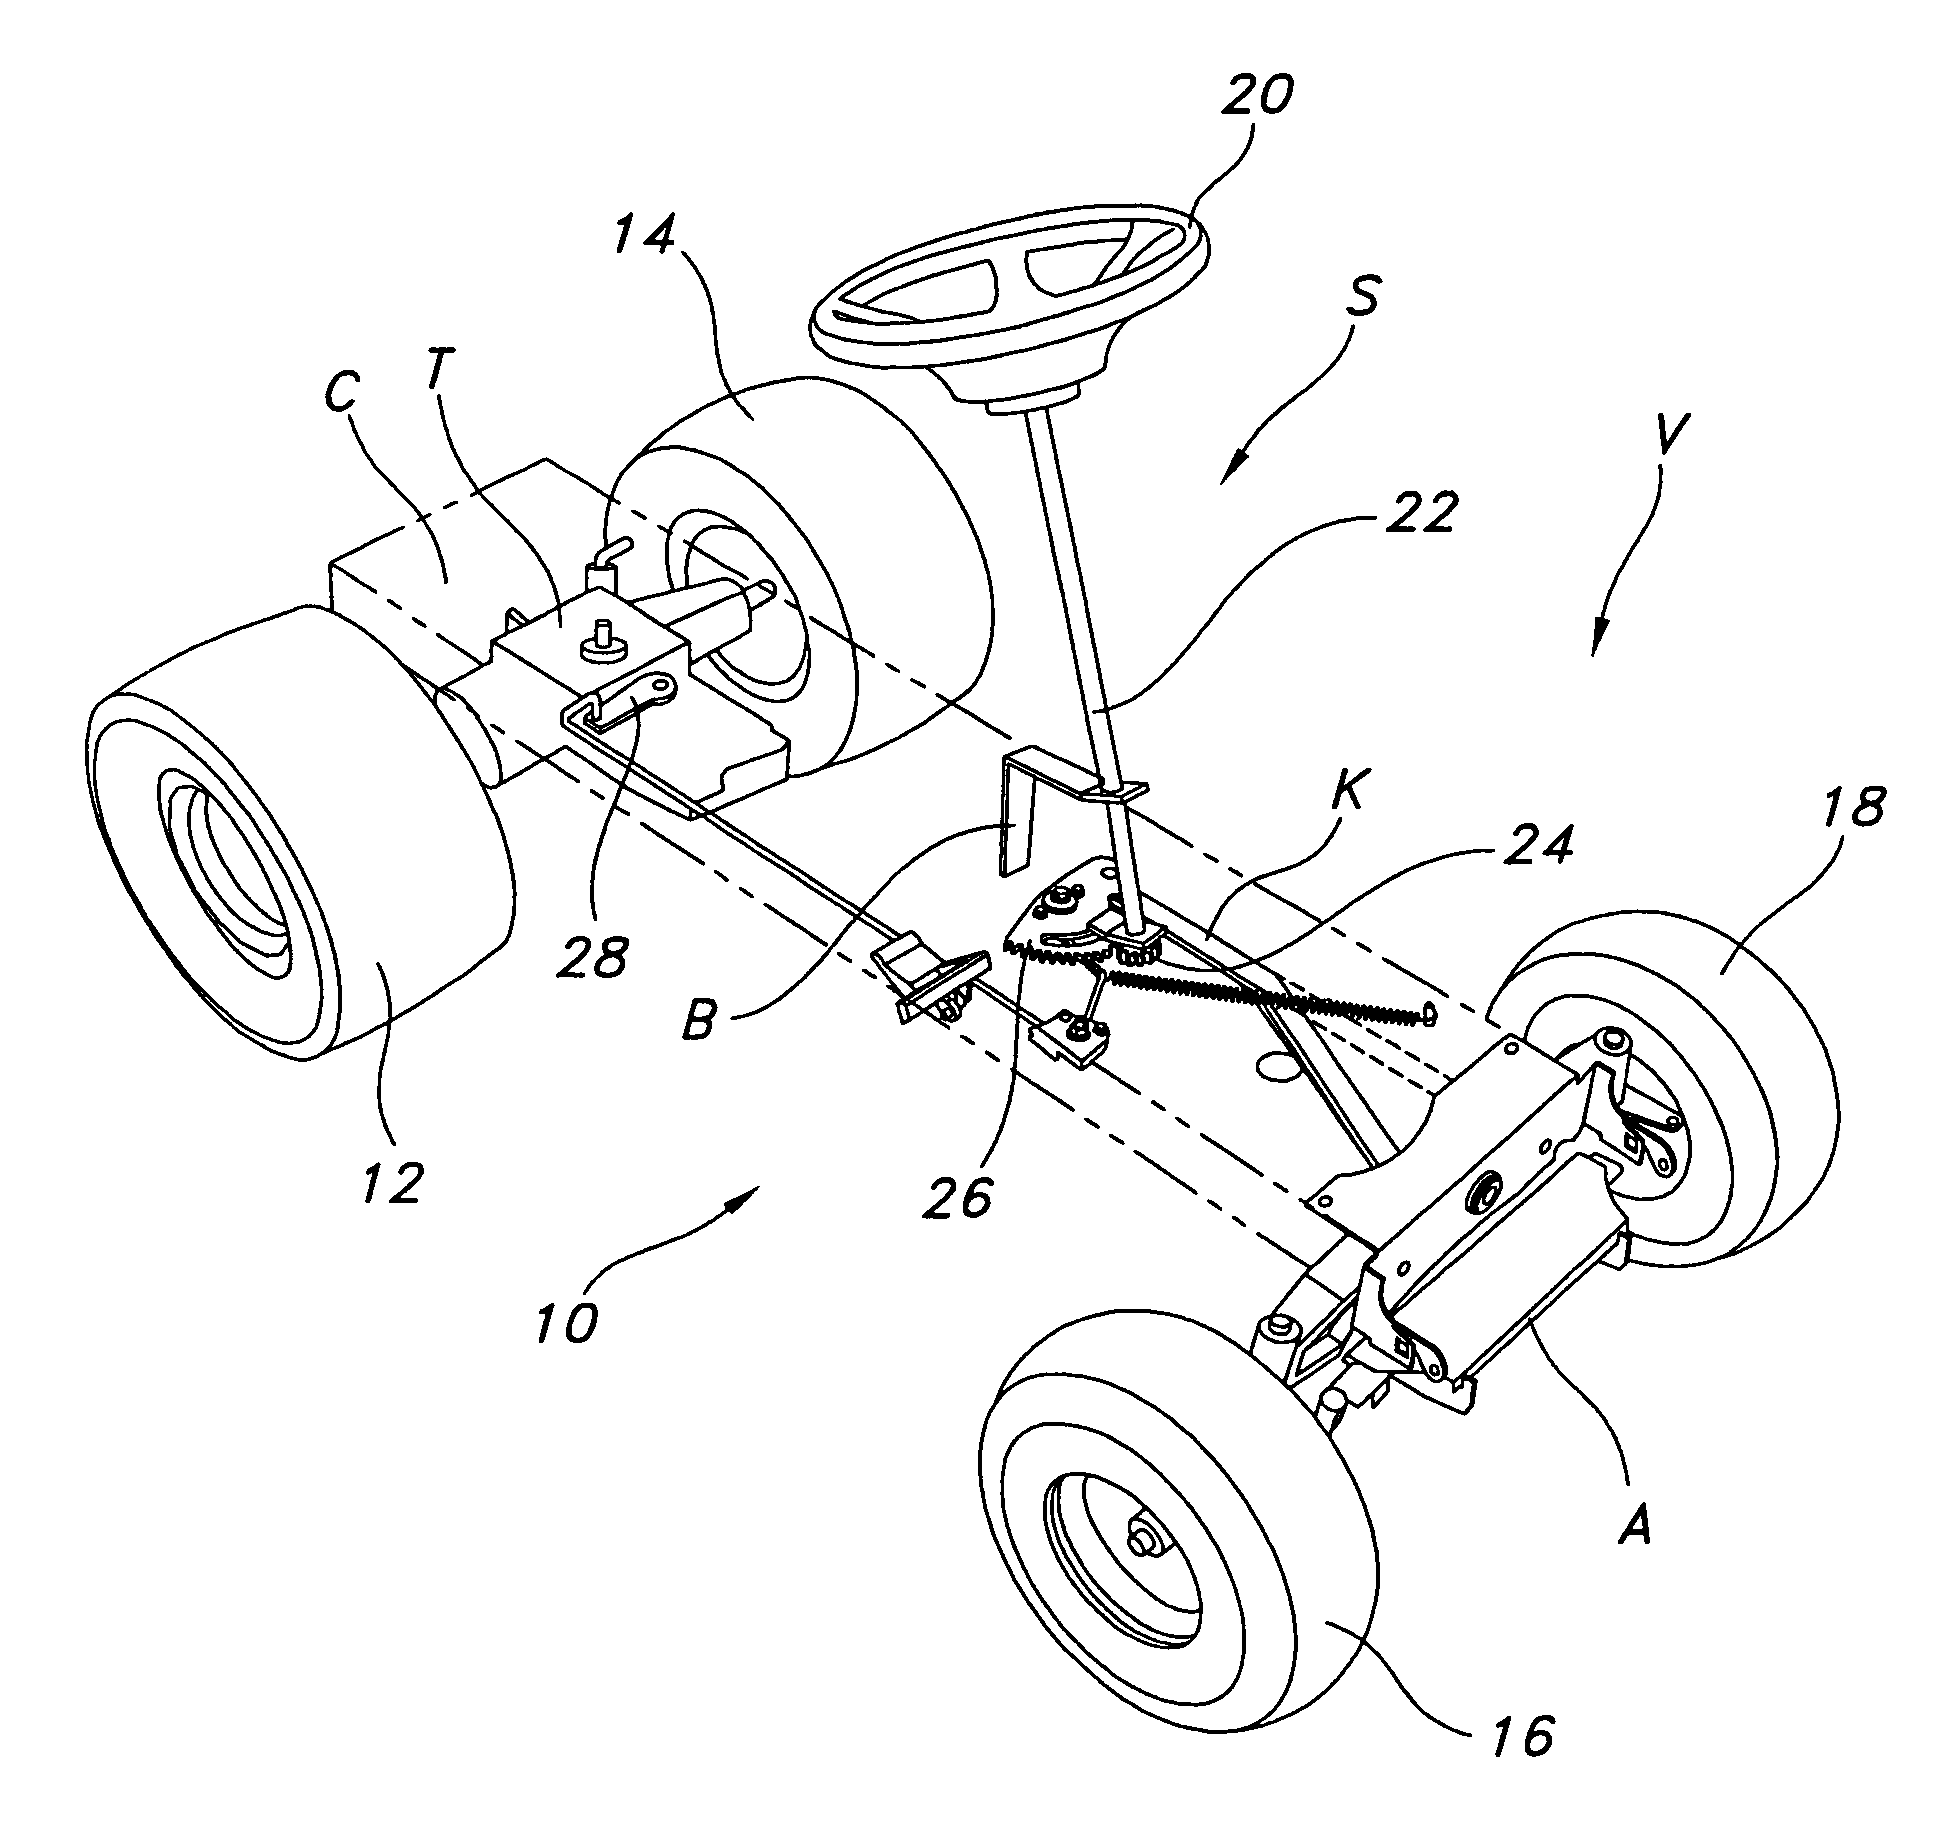 Vehicle control system with slow-in-turn capabilities and related method